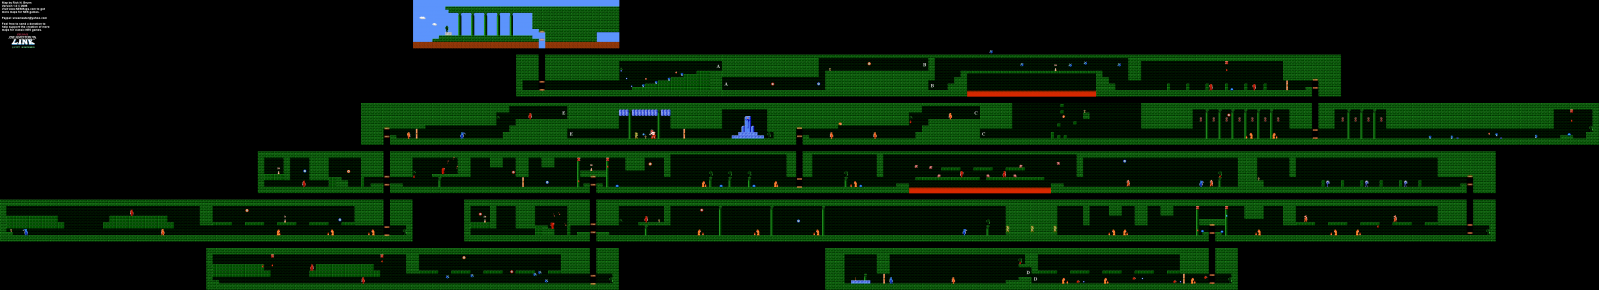 File:Legend of Zelda 2, The - Adventure of Link, The - NES - Map - Palace O...